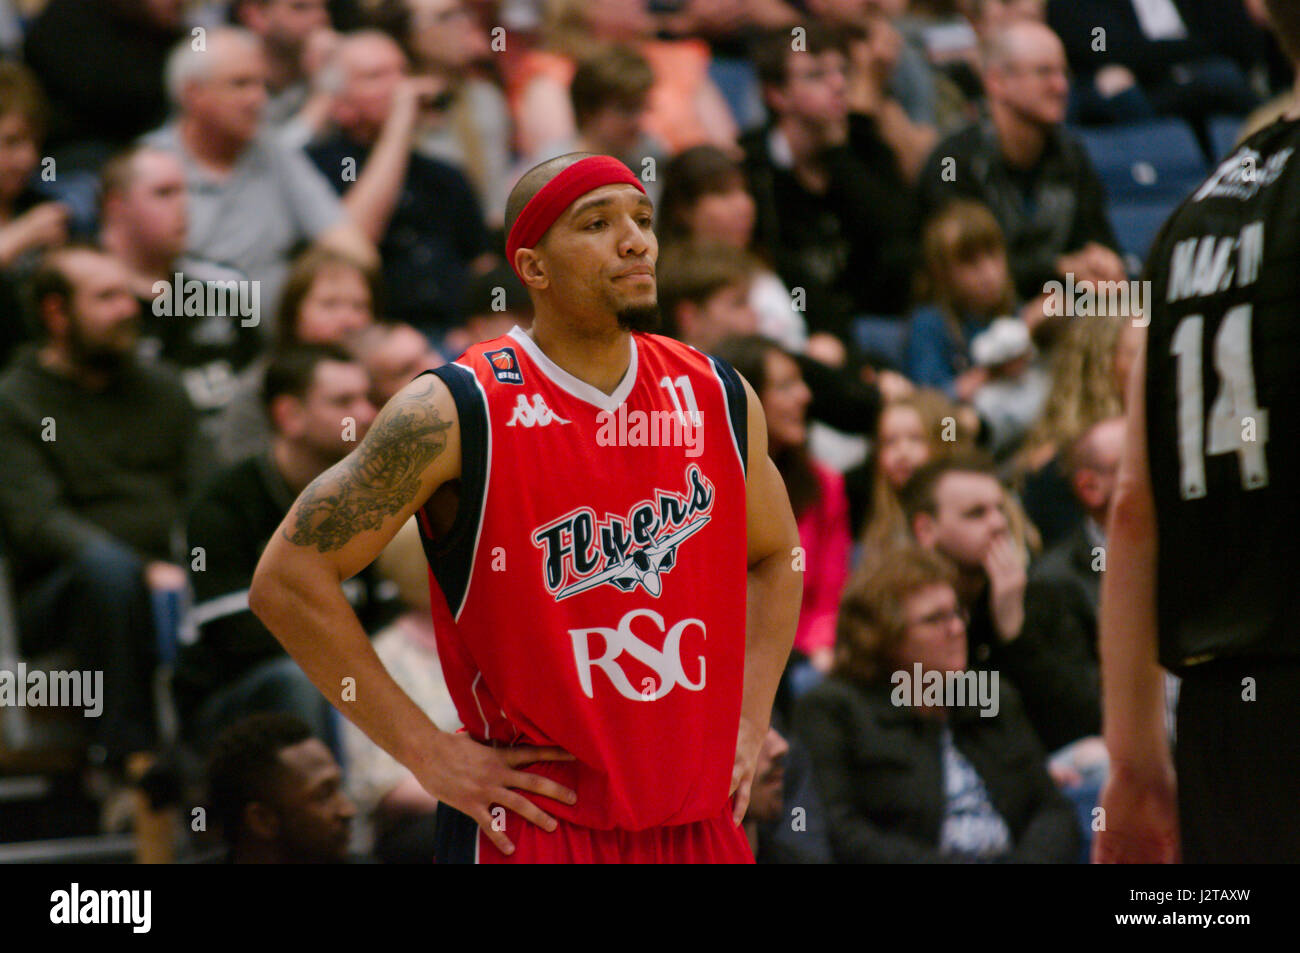 Newcastle upon Tyne, England, 30th April 2017. Greg Streete playing for Bristol Flyers against Esh Group Eagles Newcastle in the quarter final second leg of the BBL Playoffs at Sport Central. Credit: Colin Edwards/Alamy Live News. Stock Photo